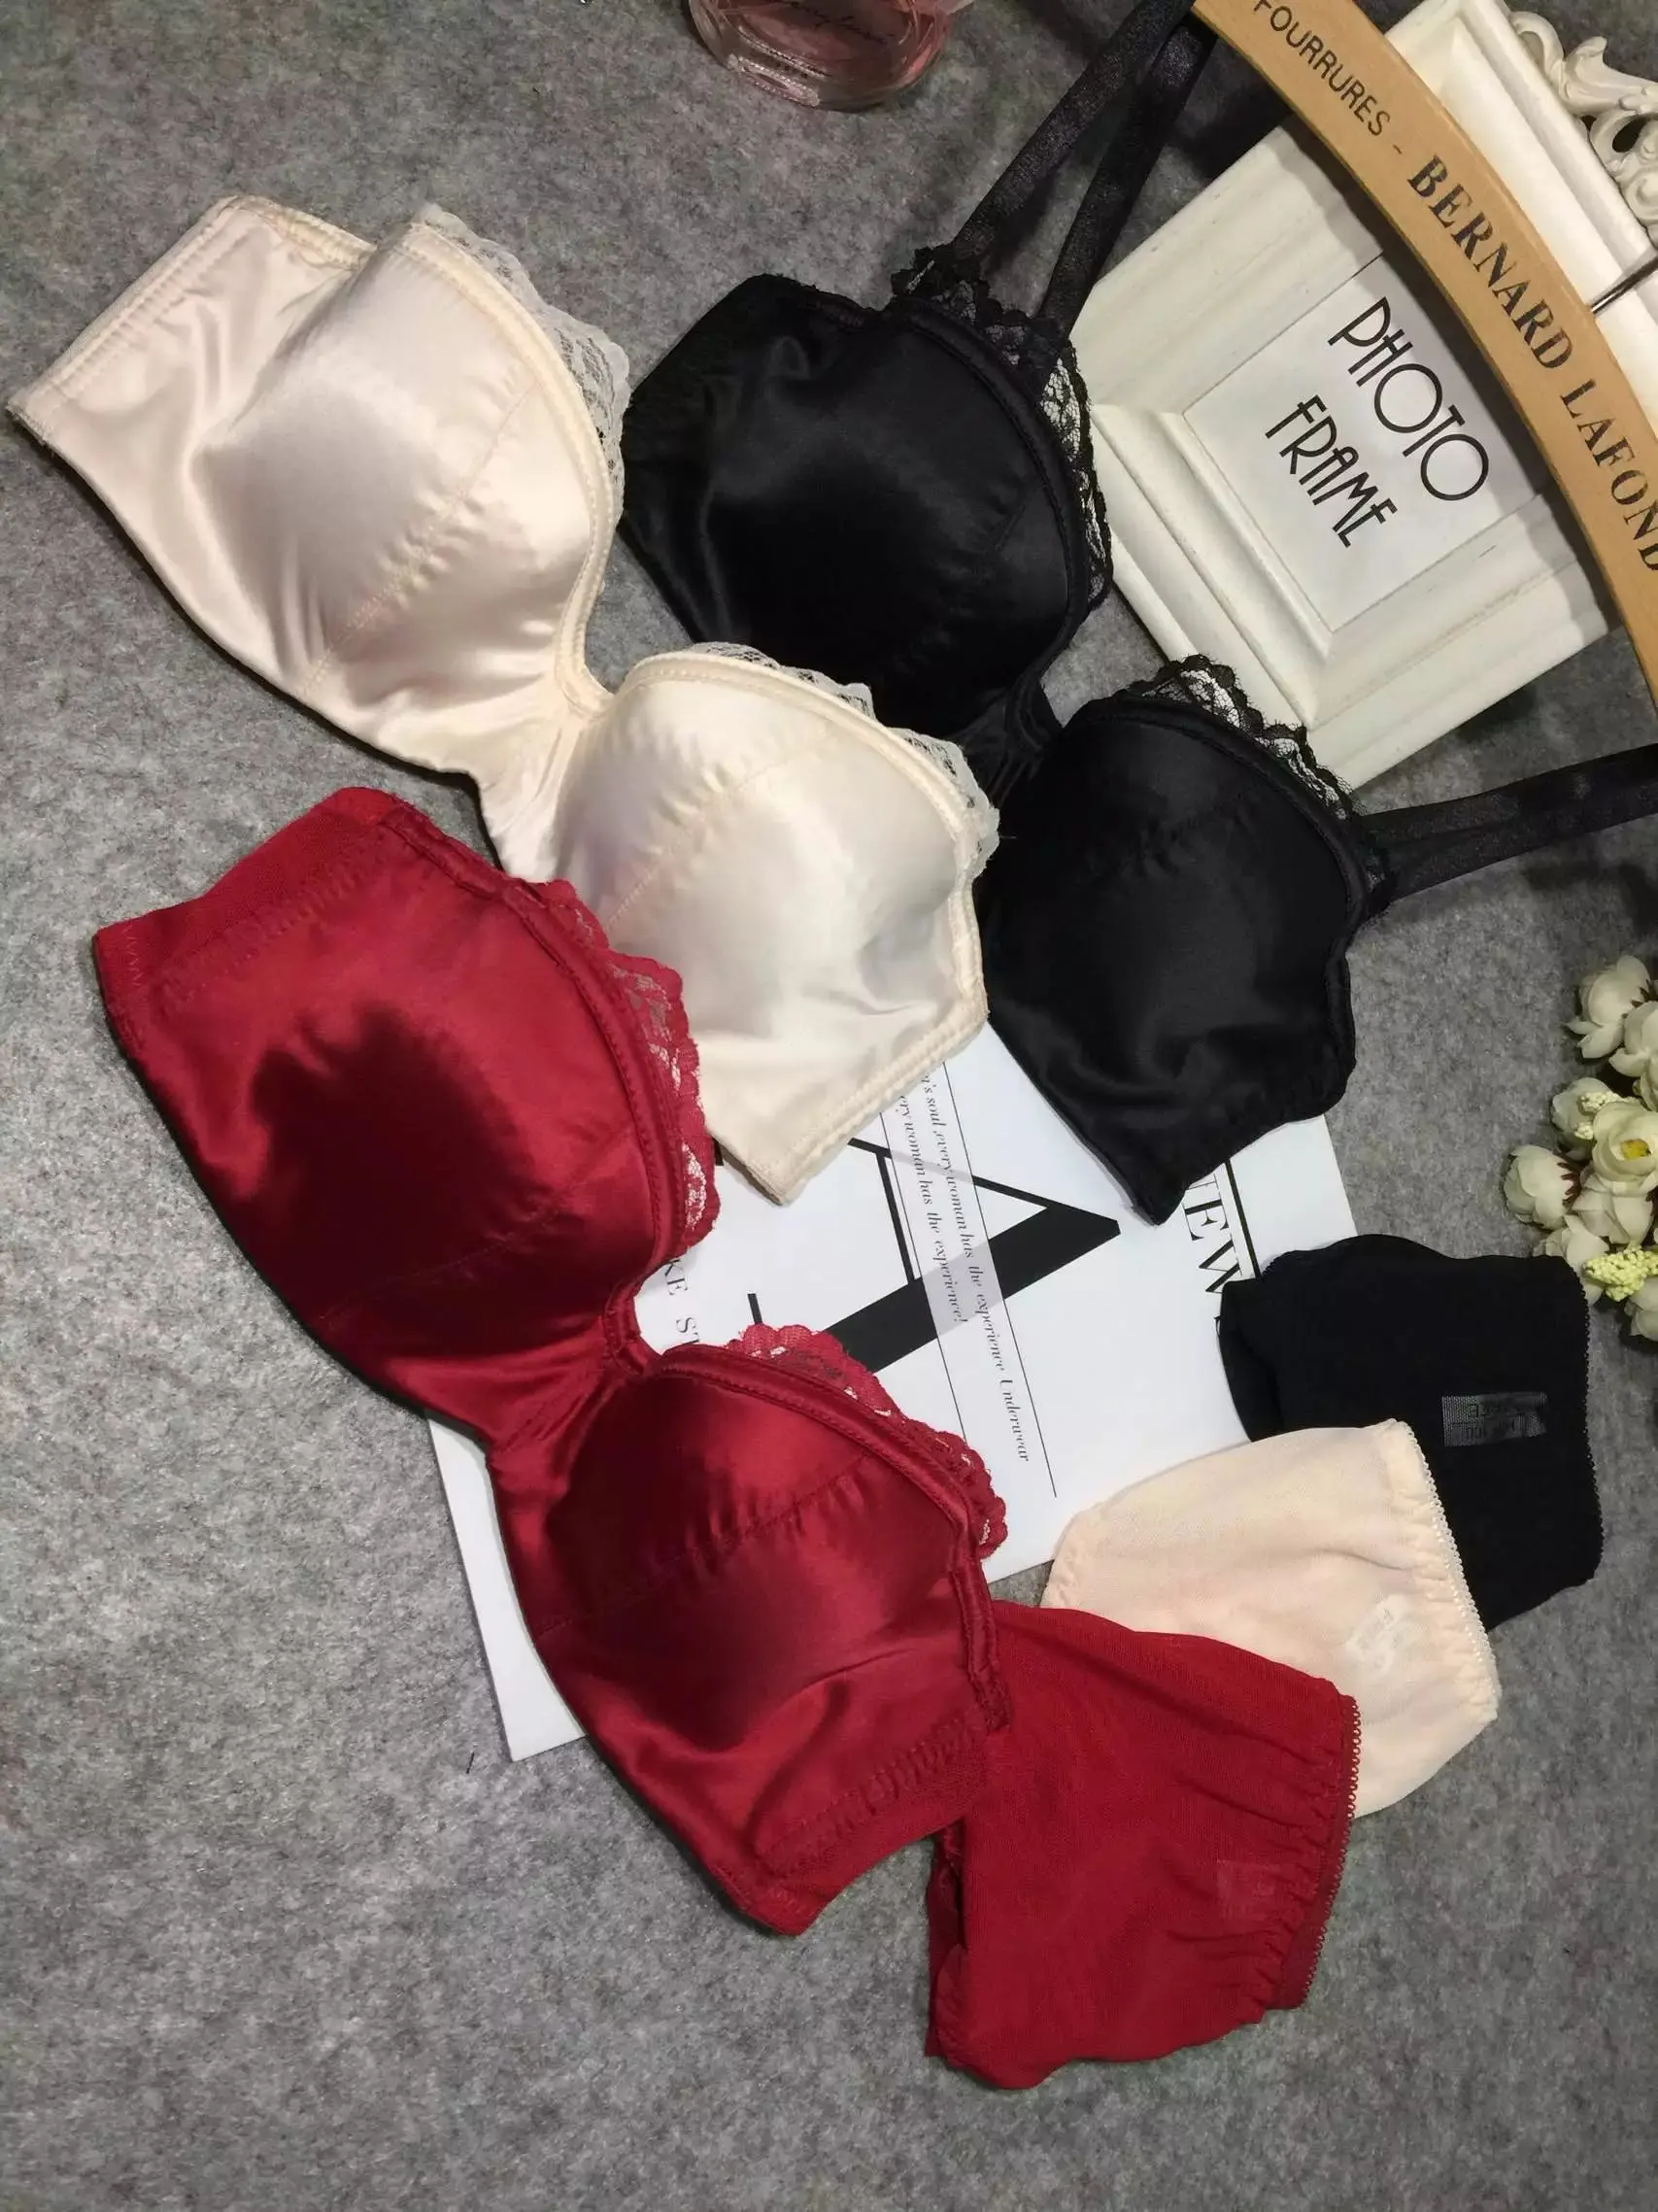 New Japanese 1/2 half cup thin type of light coated cotton breasted sexy women underwear bra set beige red black 3 colors 4